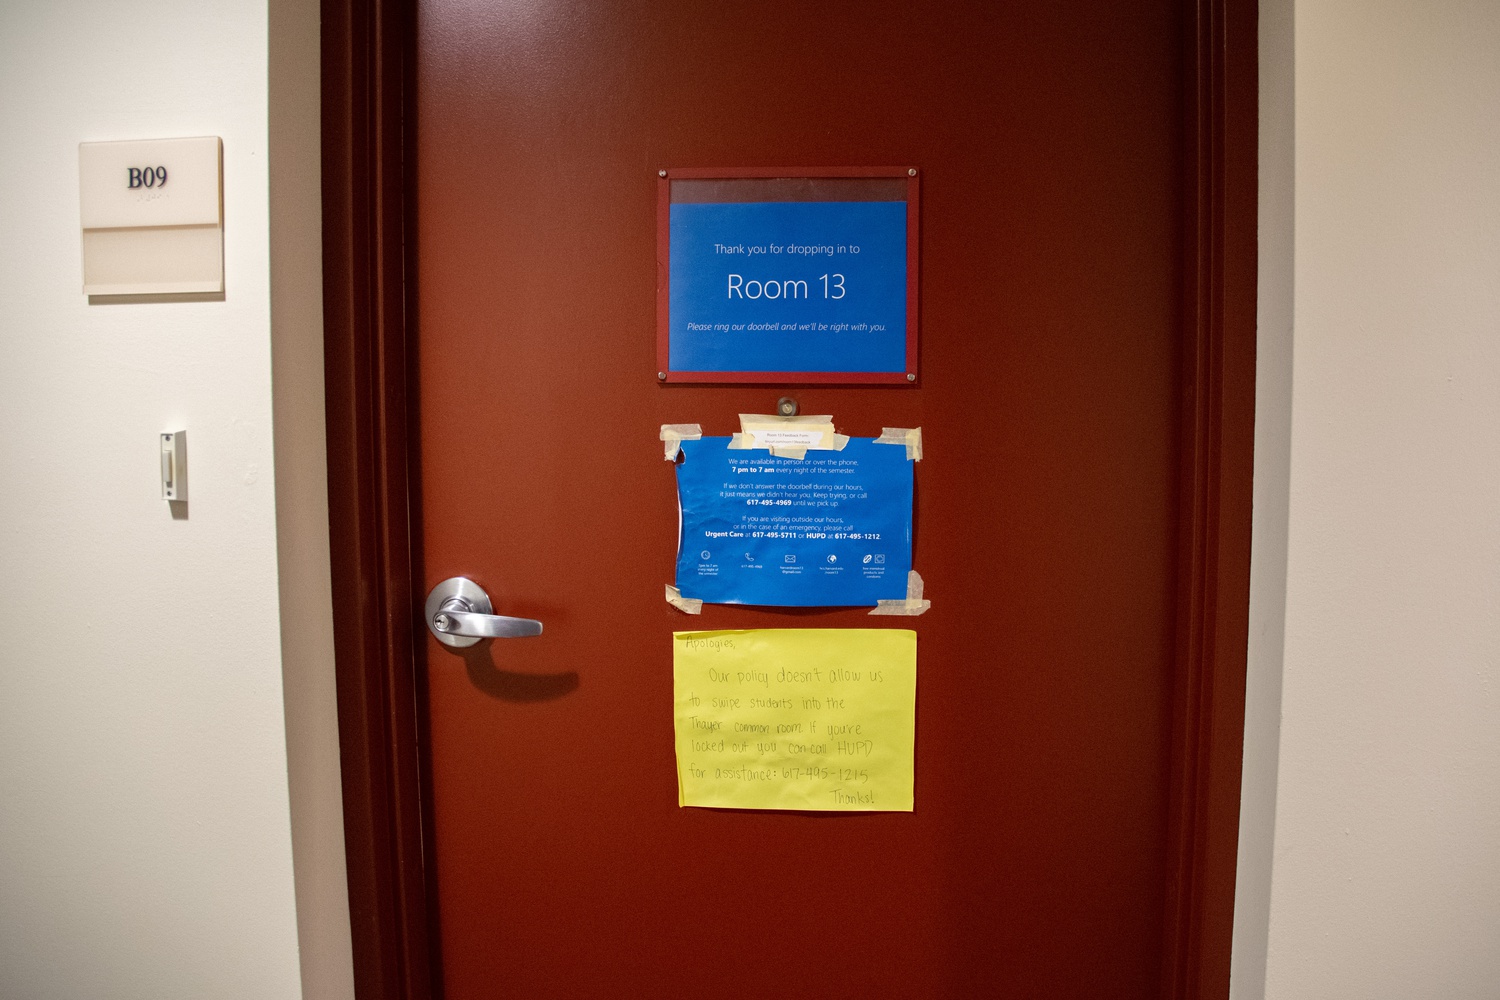 Room 13 peer counseling is available in the basement of Thayer, a freshman dorm located in Harvard Yard.